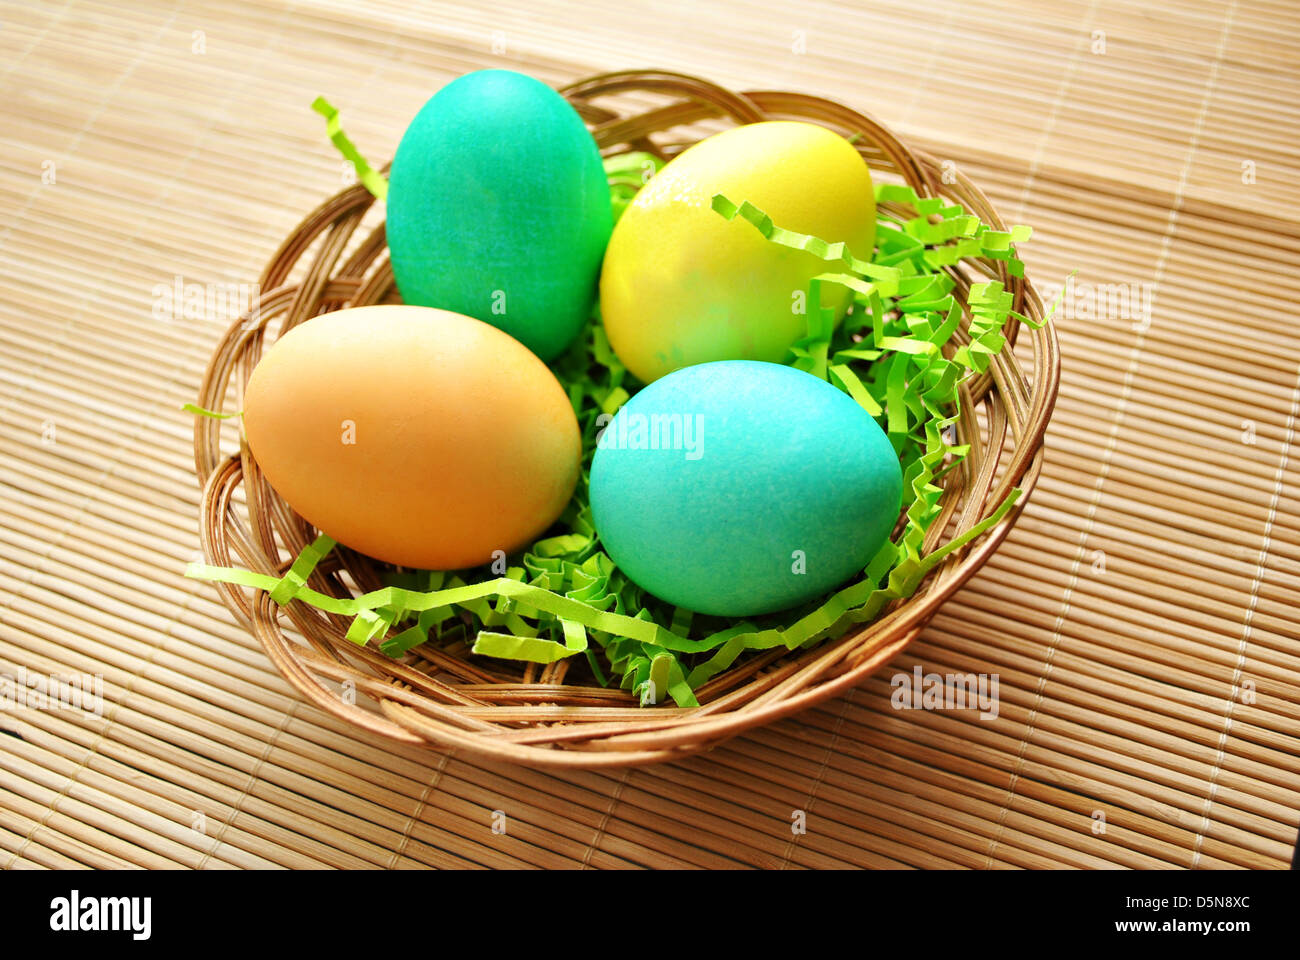 Colorful Easter Eggs in a Basket Stock Photo